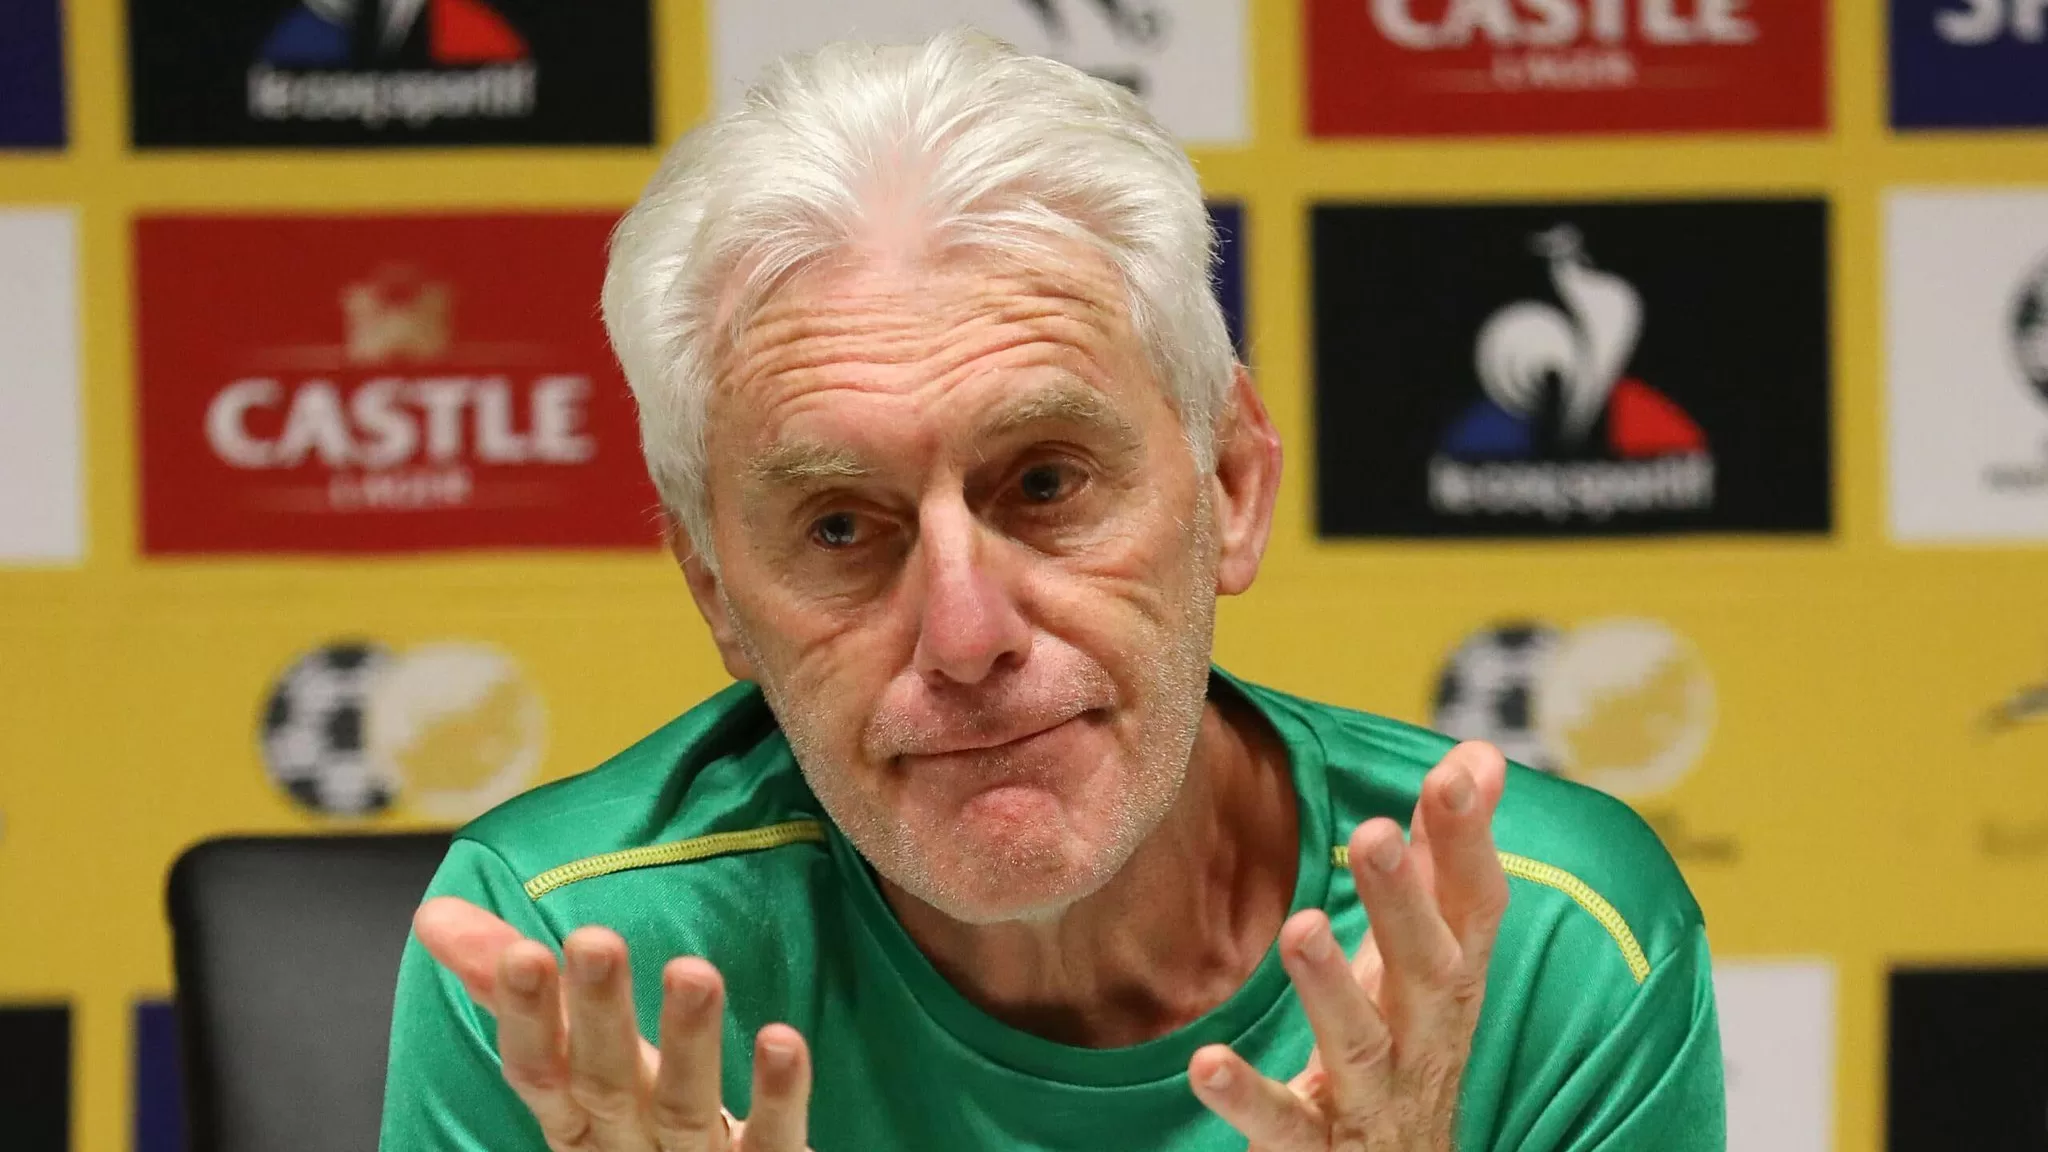 Limpopo turns down offer to host Bafana Bafana matches